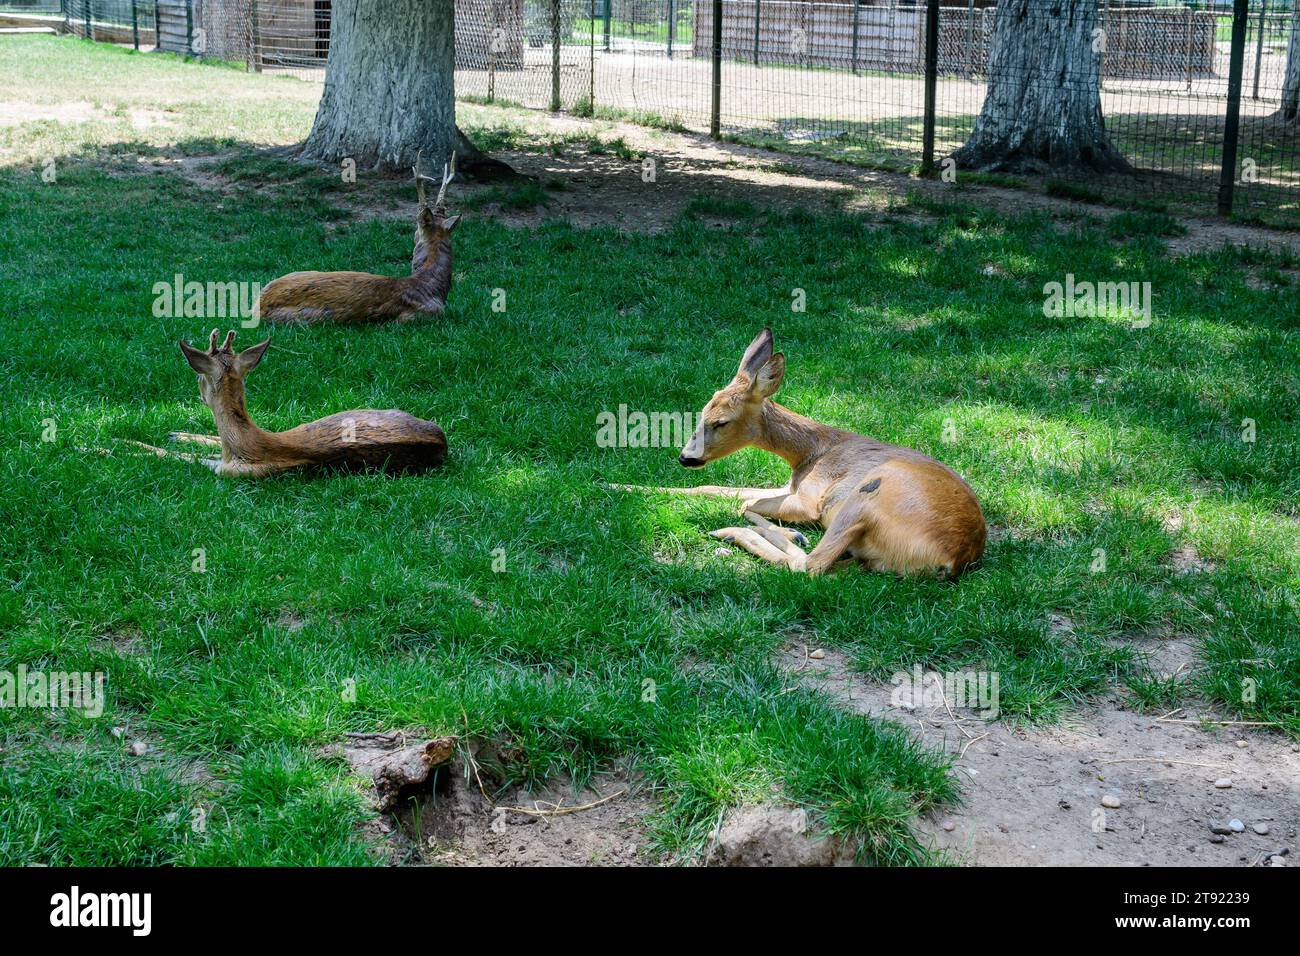 Small baby deers on a green grass in a garden Stock Photo